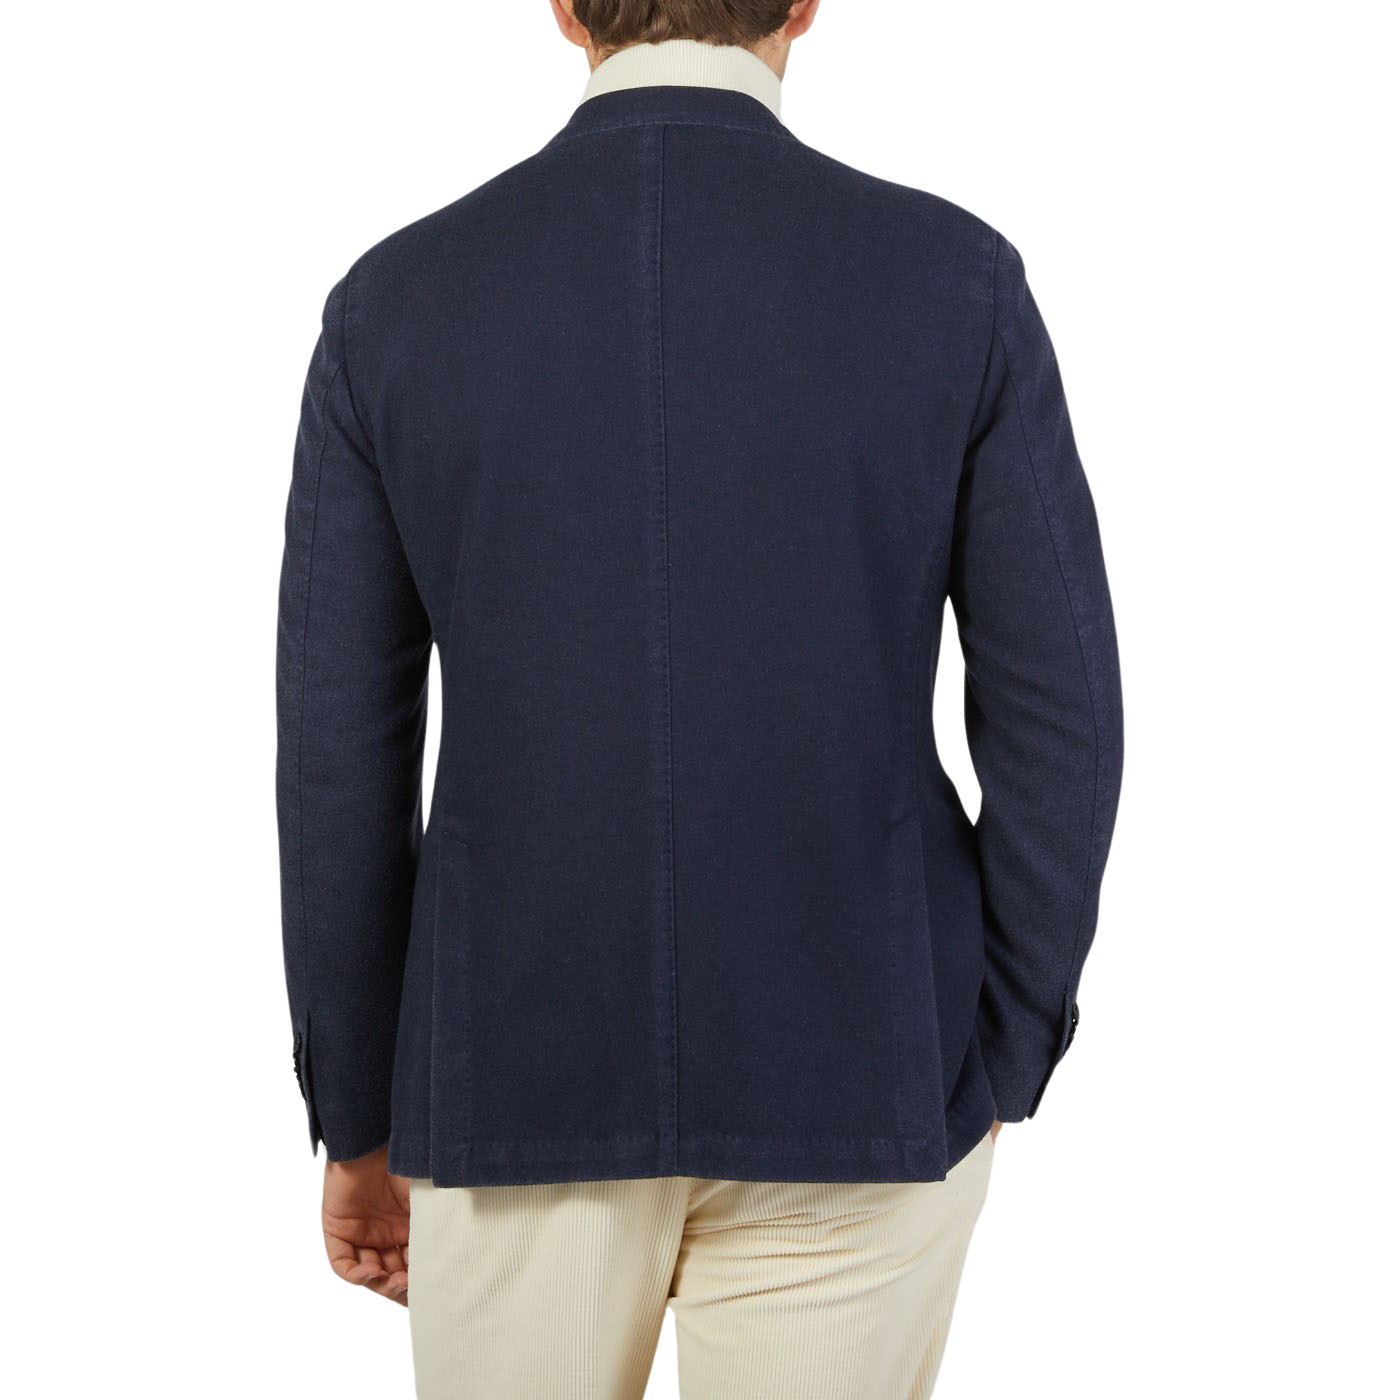 The back view of a man wearing an L.B.M. 1911 Dark Blue Washed Wool Cashmere Blazer.